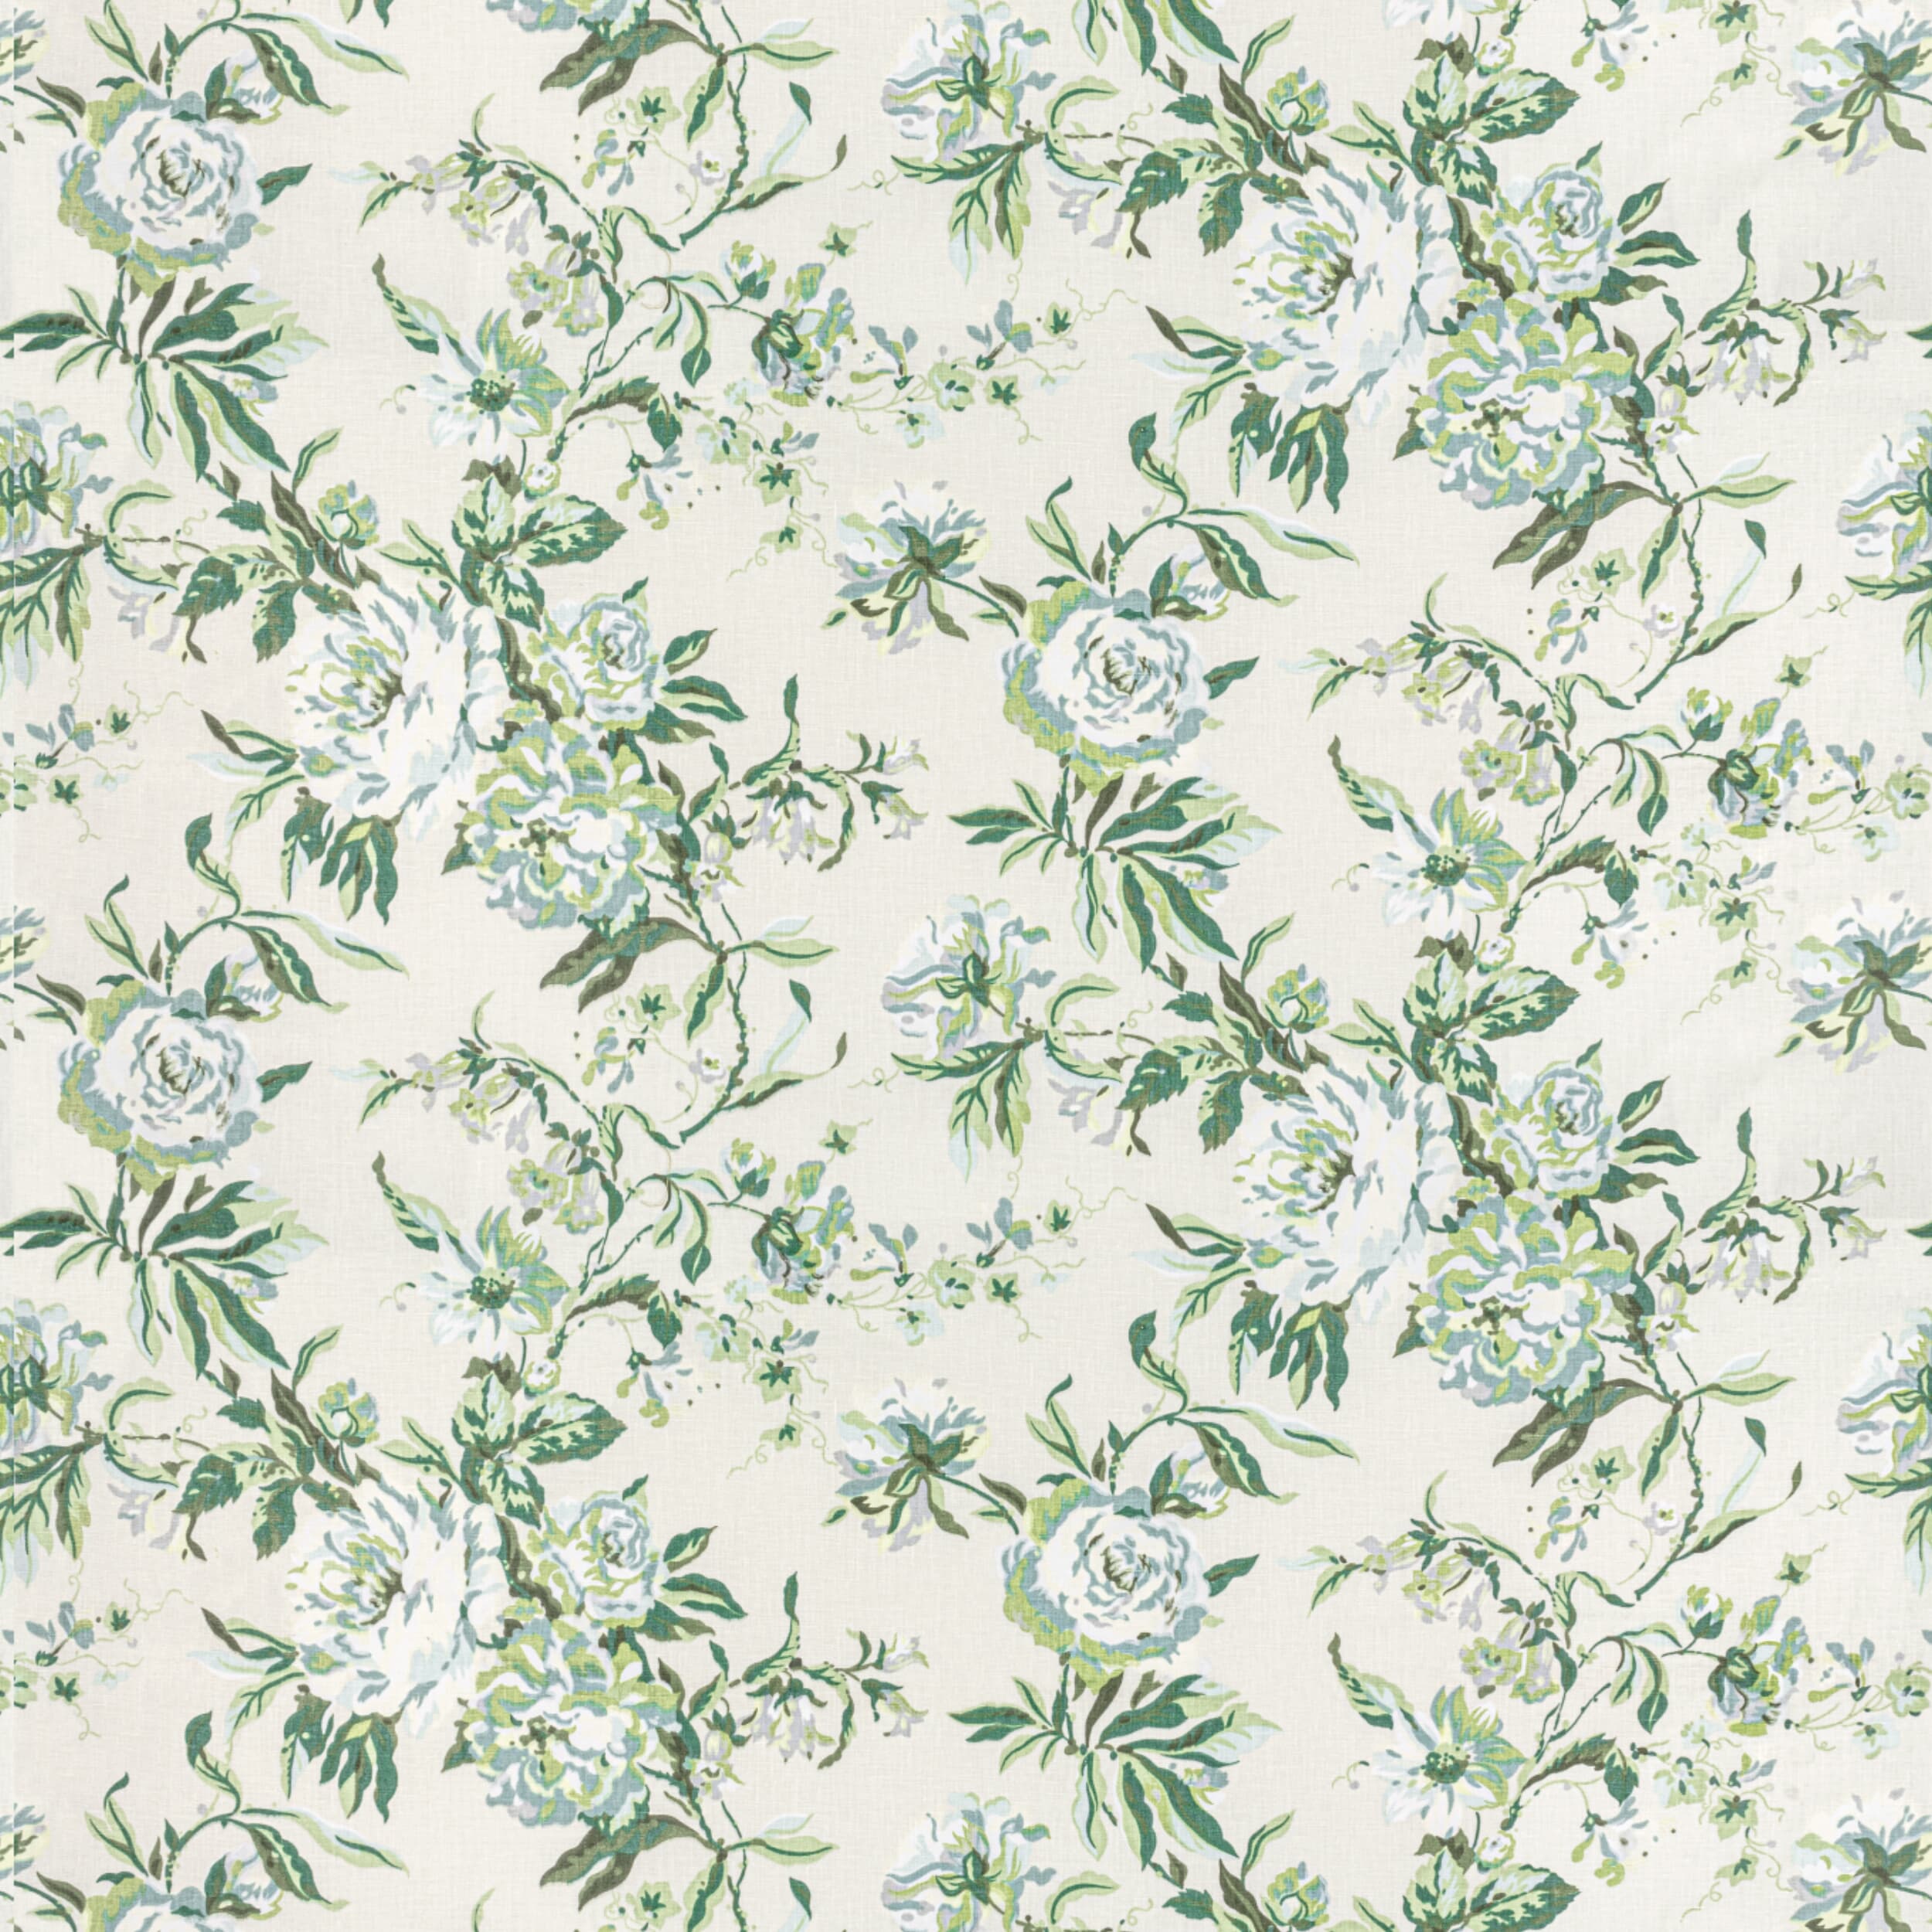 7812-49 Wrentham Seaglass by Stout Fabric